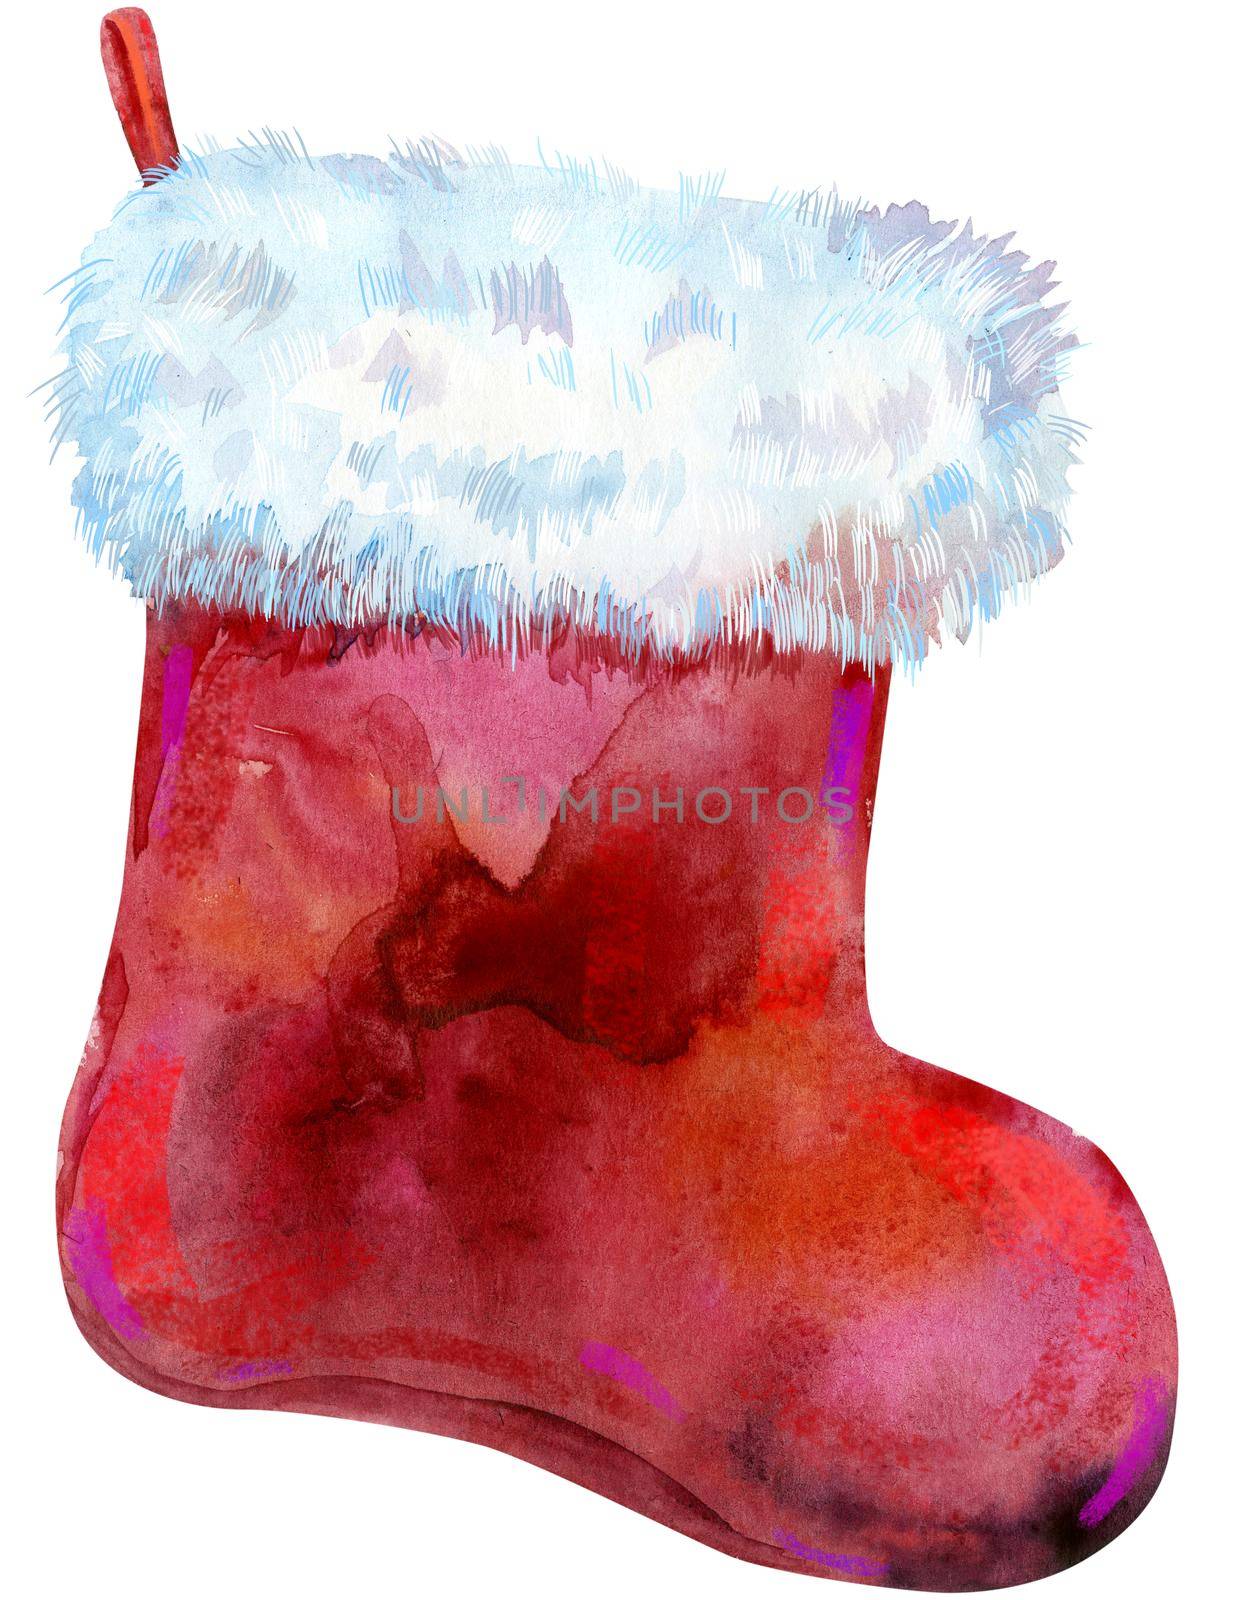 Christmas red sock for gifts isolated on white background. Watercolor hand drawn illustration